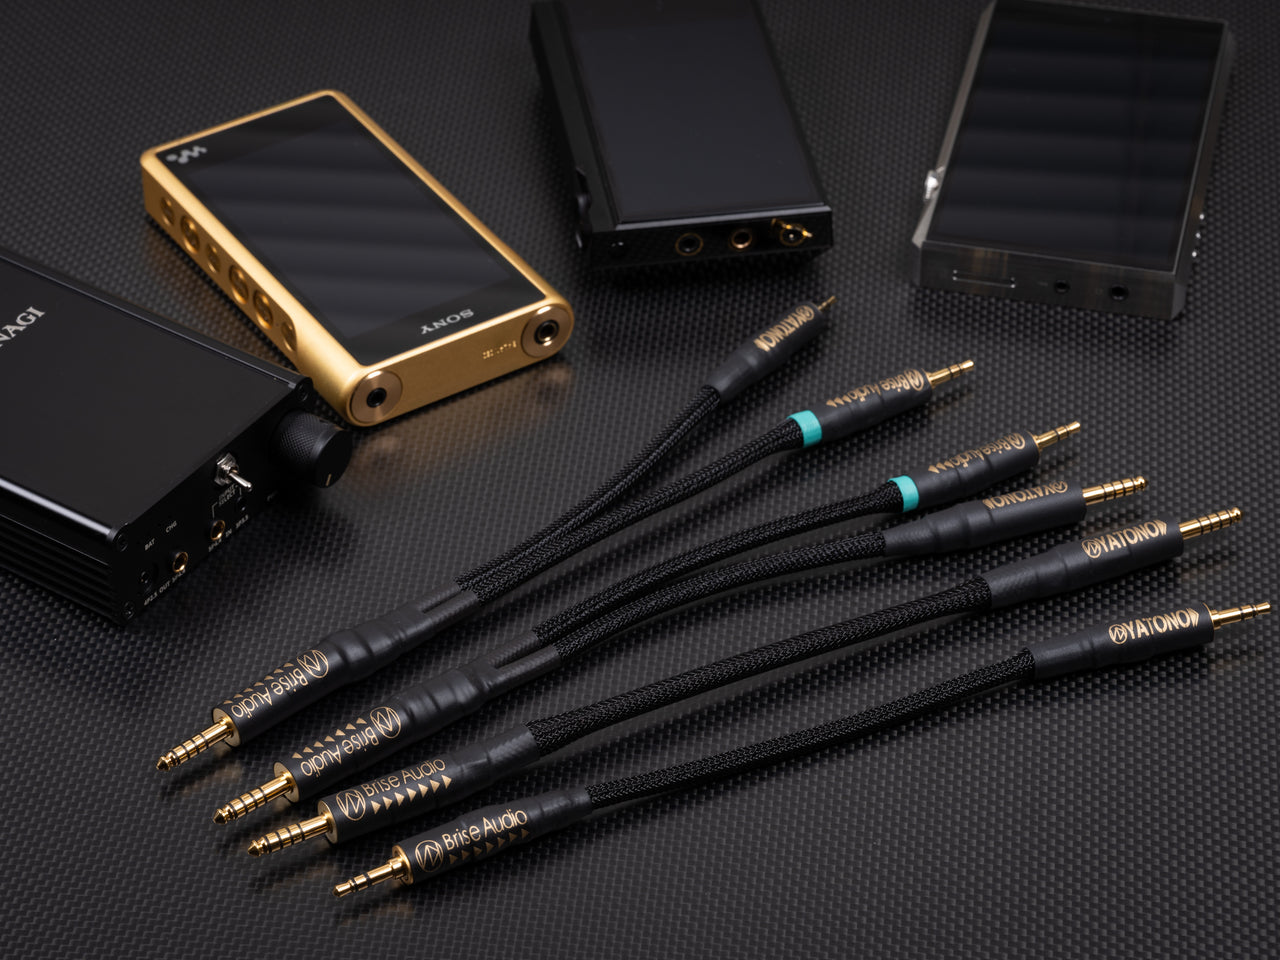 On August 25, 2021, BriseAudio will release YATONO-MINI Ultimate, a line cable (mini-mini cable) designed for use with high-end portable amplifiers.